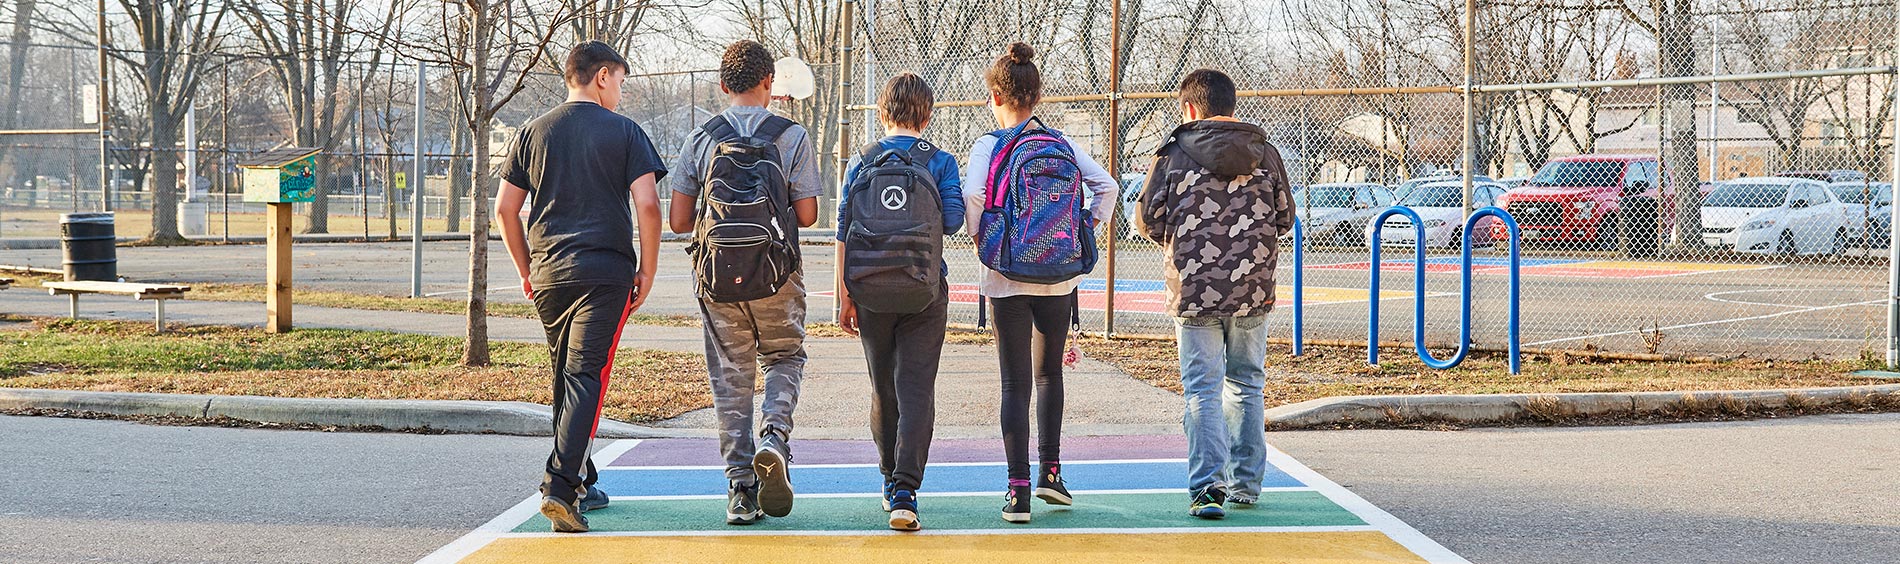 teens walking together with backpacks